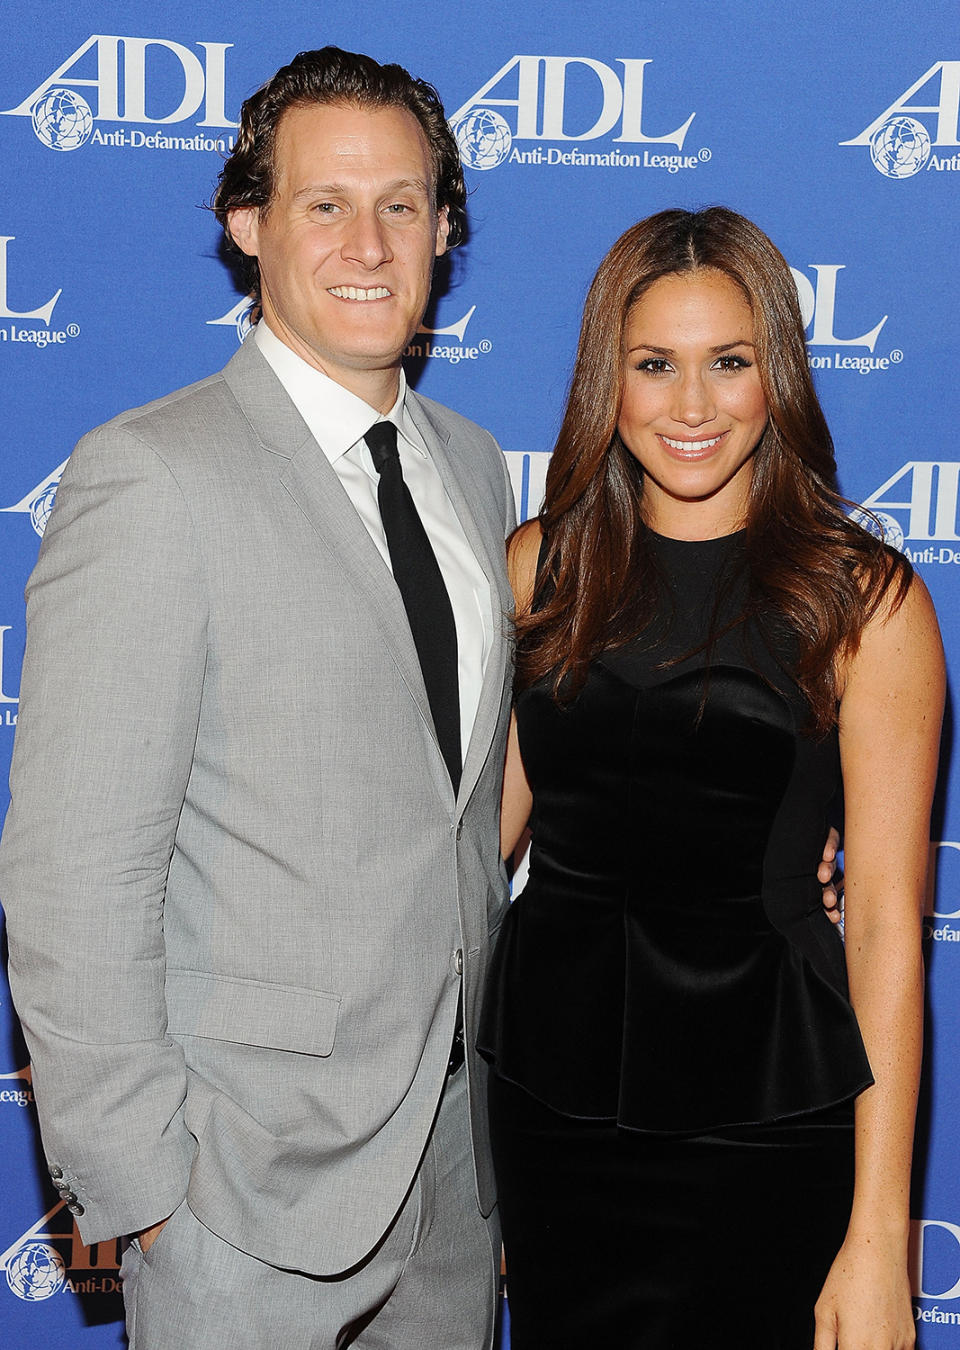 Trevor Engelson and Meghan Markle in October 2011. (Photo by Michael Kovac/WireImage)